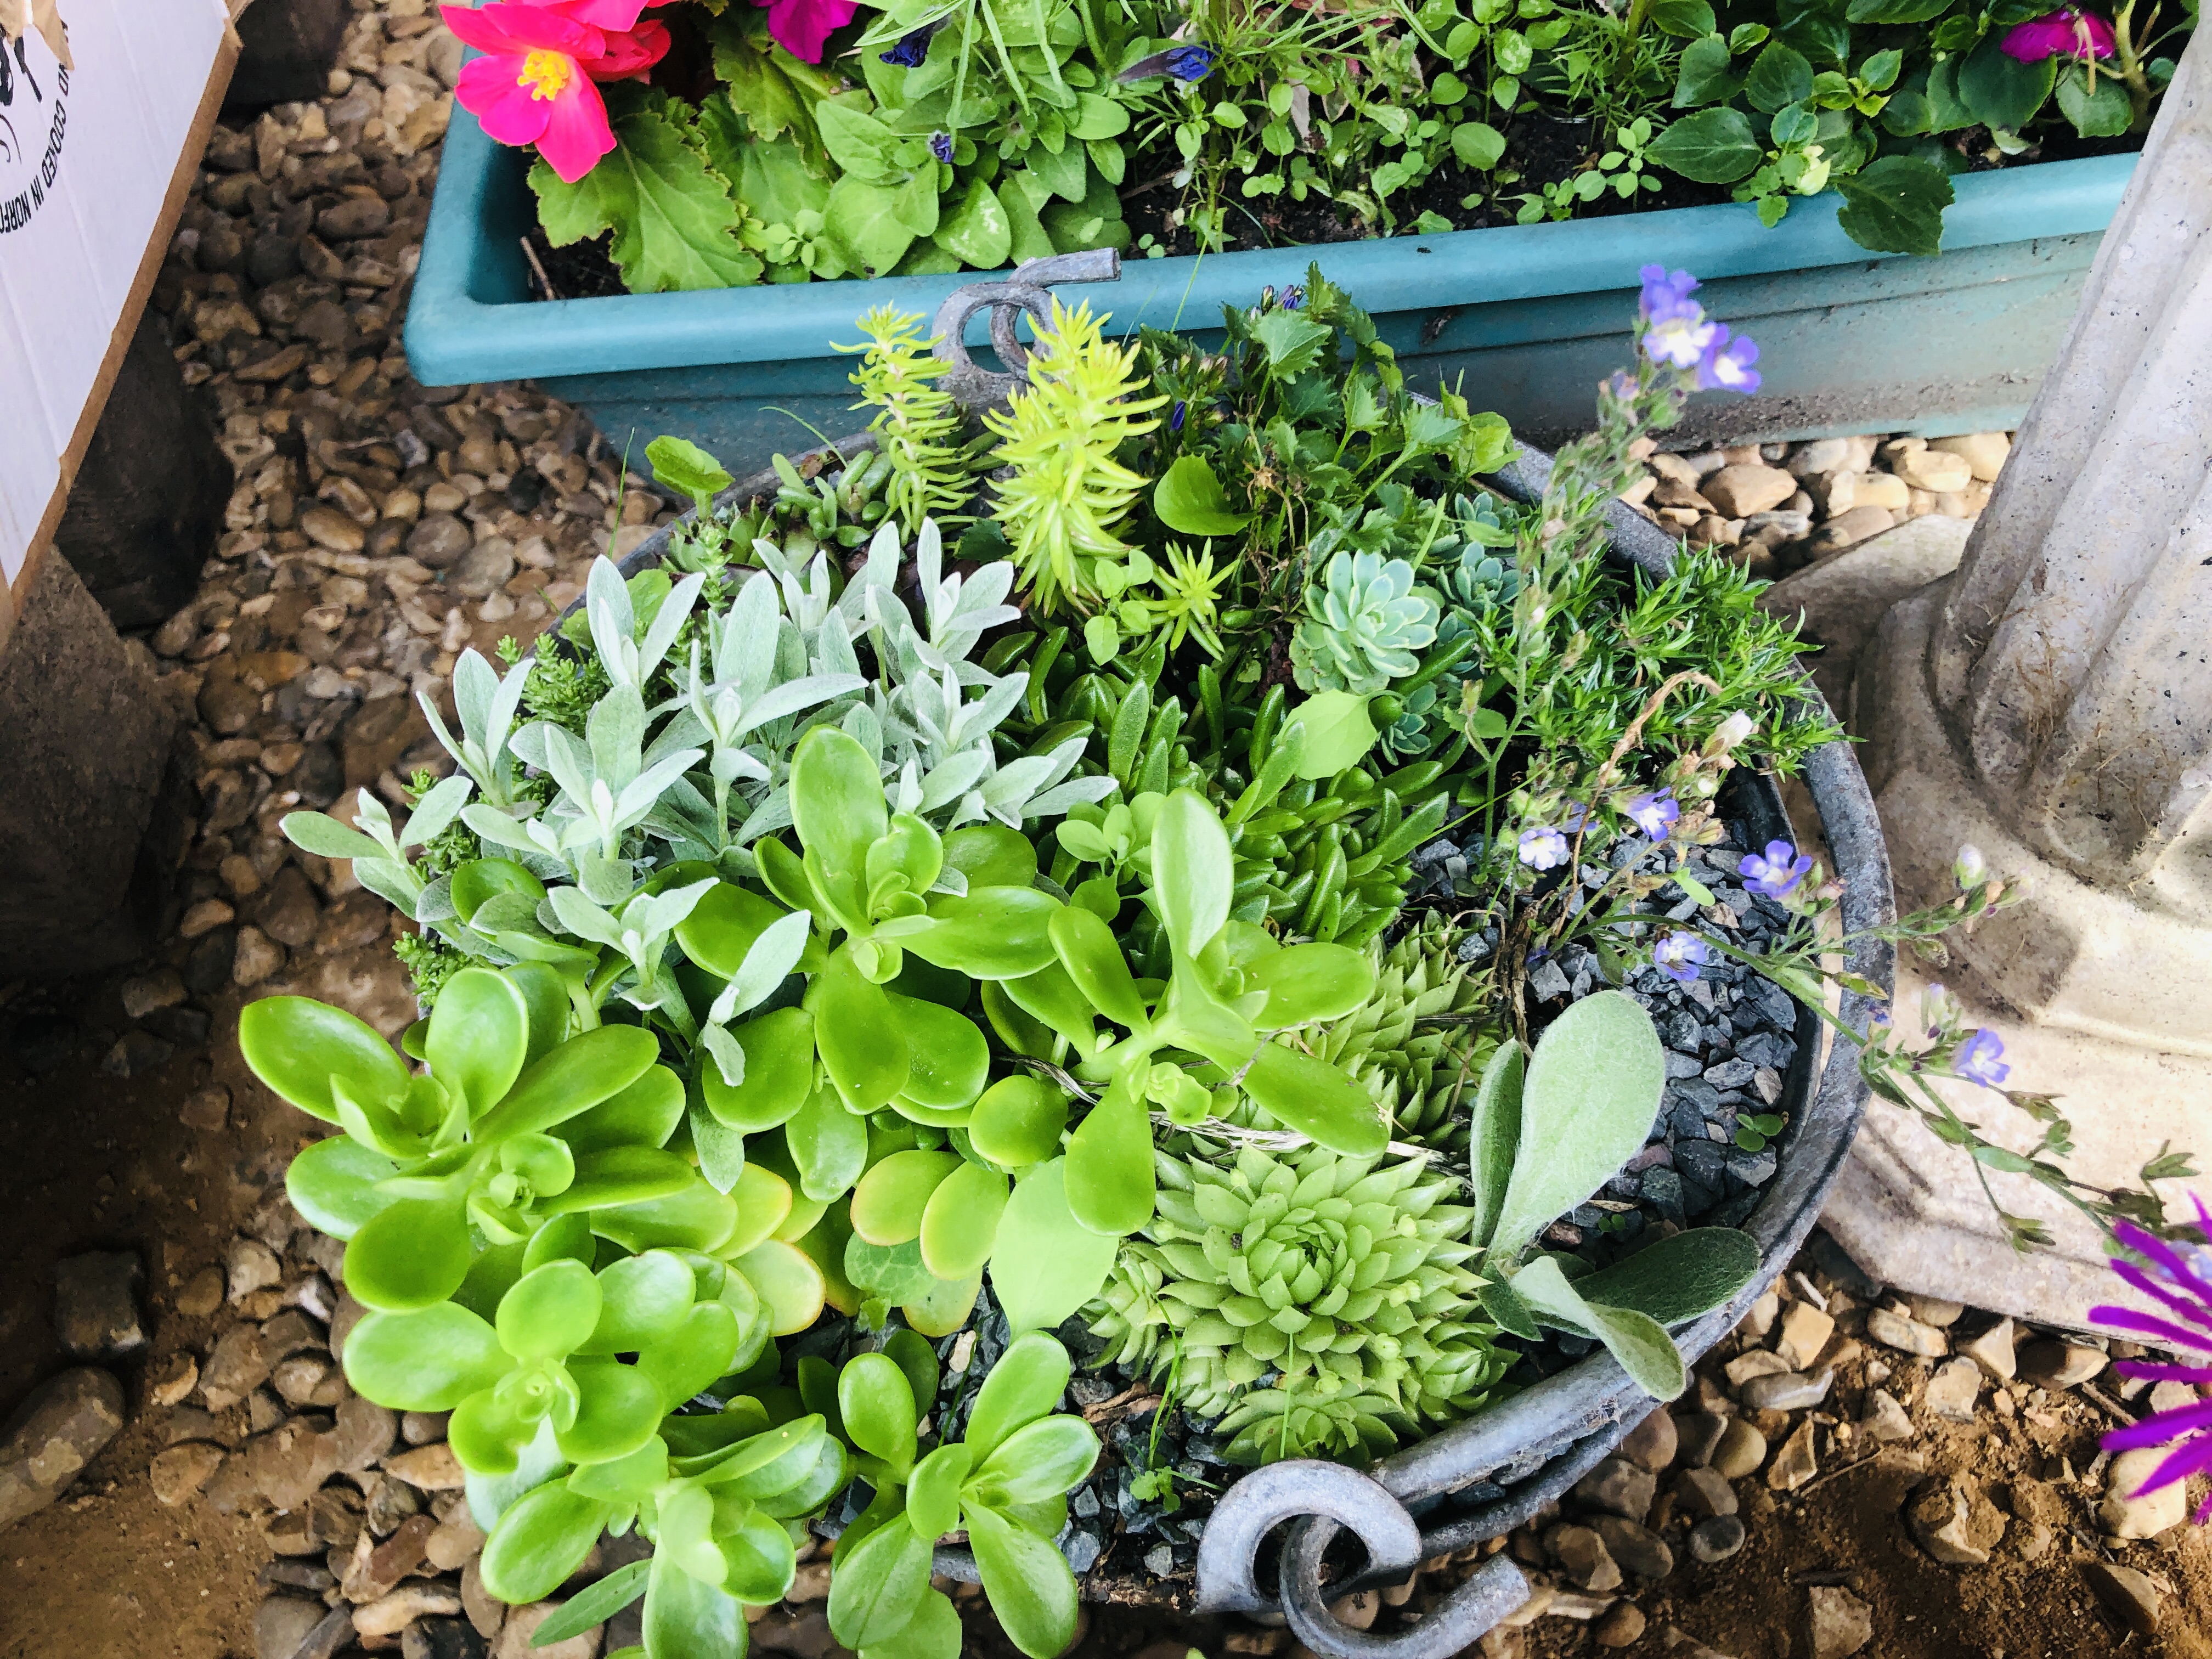 THREE VINTAGE BUCKETS CONTAINING ROCKERY AND ALPINE PLANTS ALONG WITH PLASTIC TROUGH PLANTER WITH - Image 4 of 6